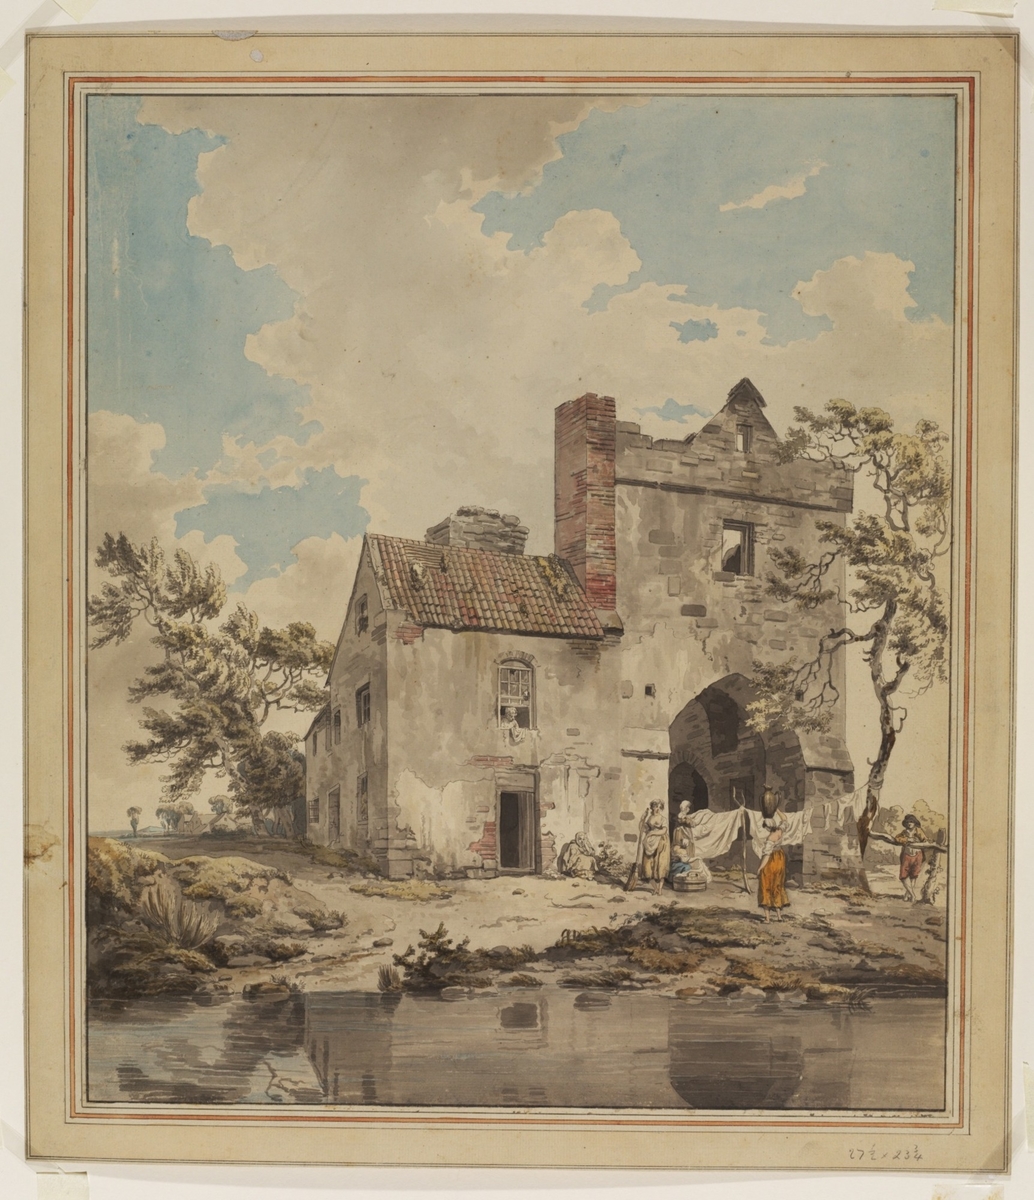 Irish Landscape with a House and Figures